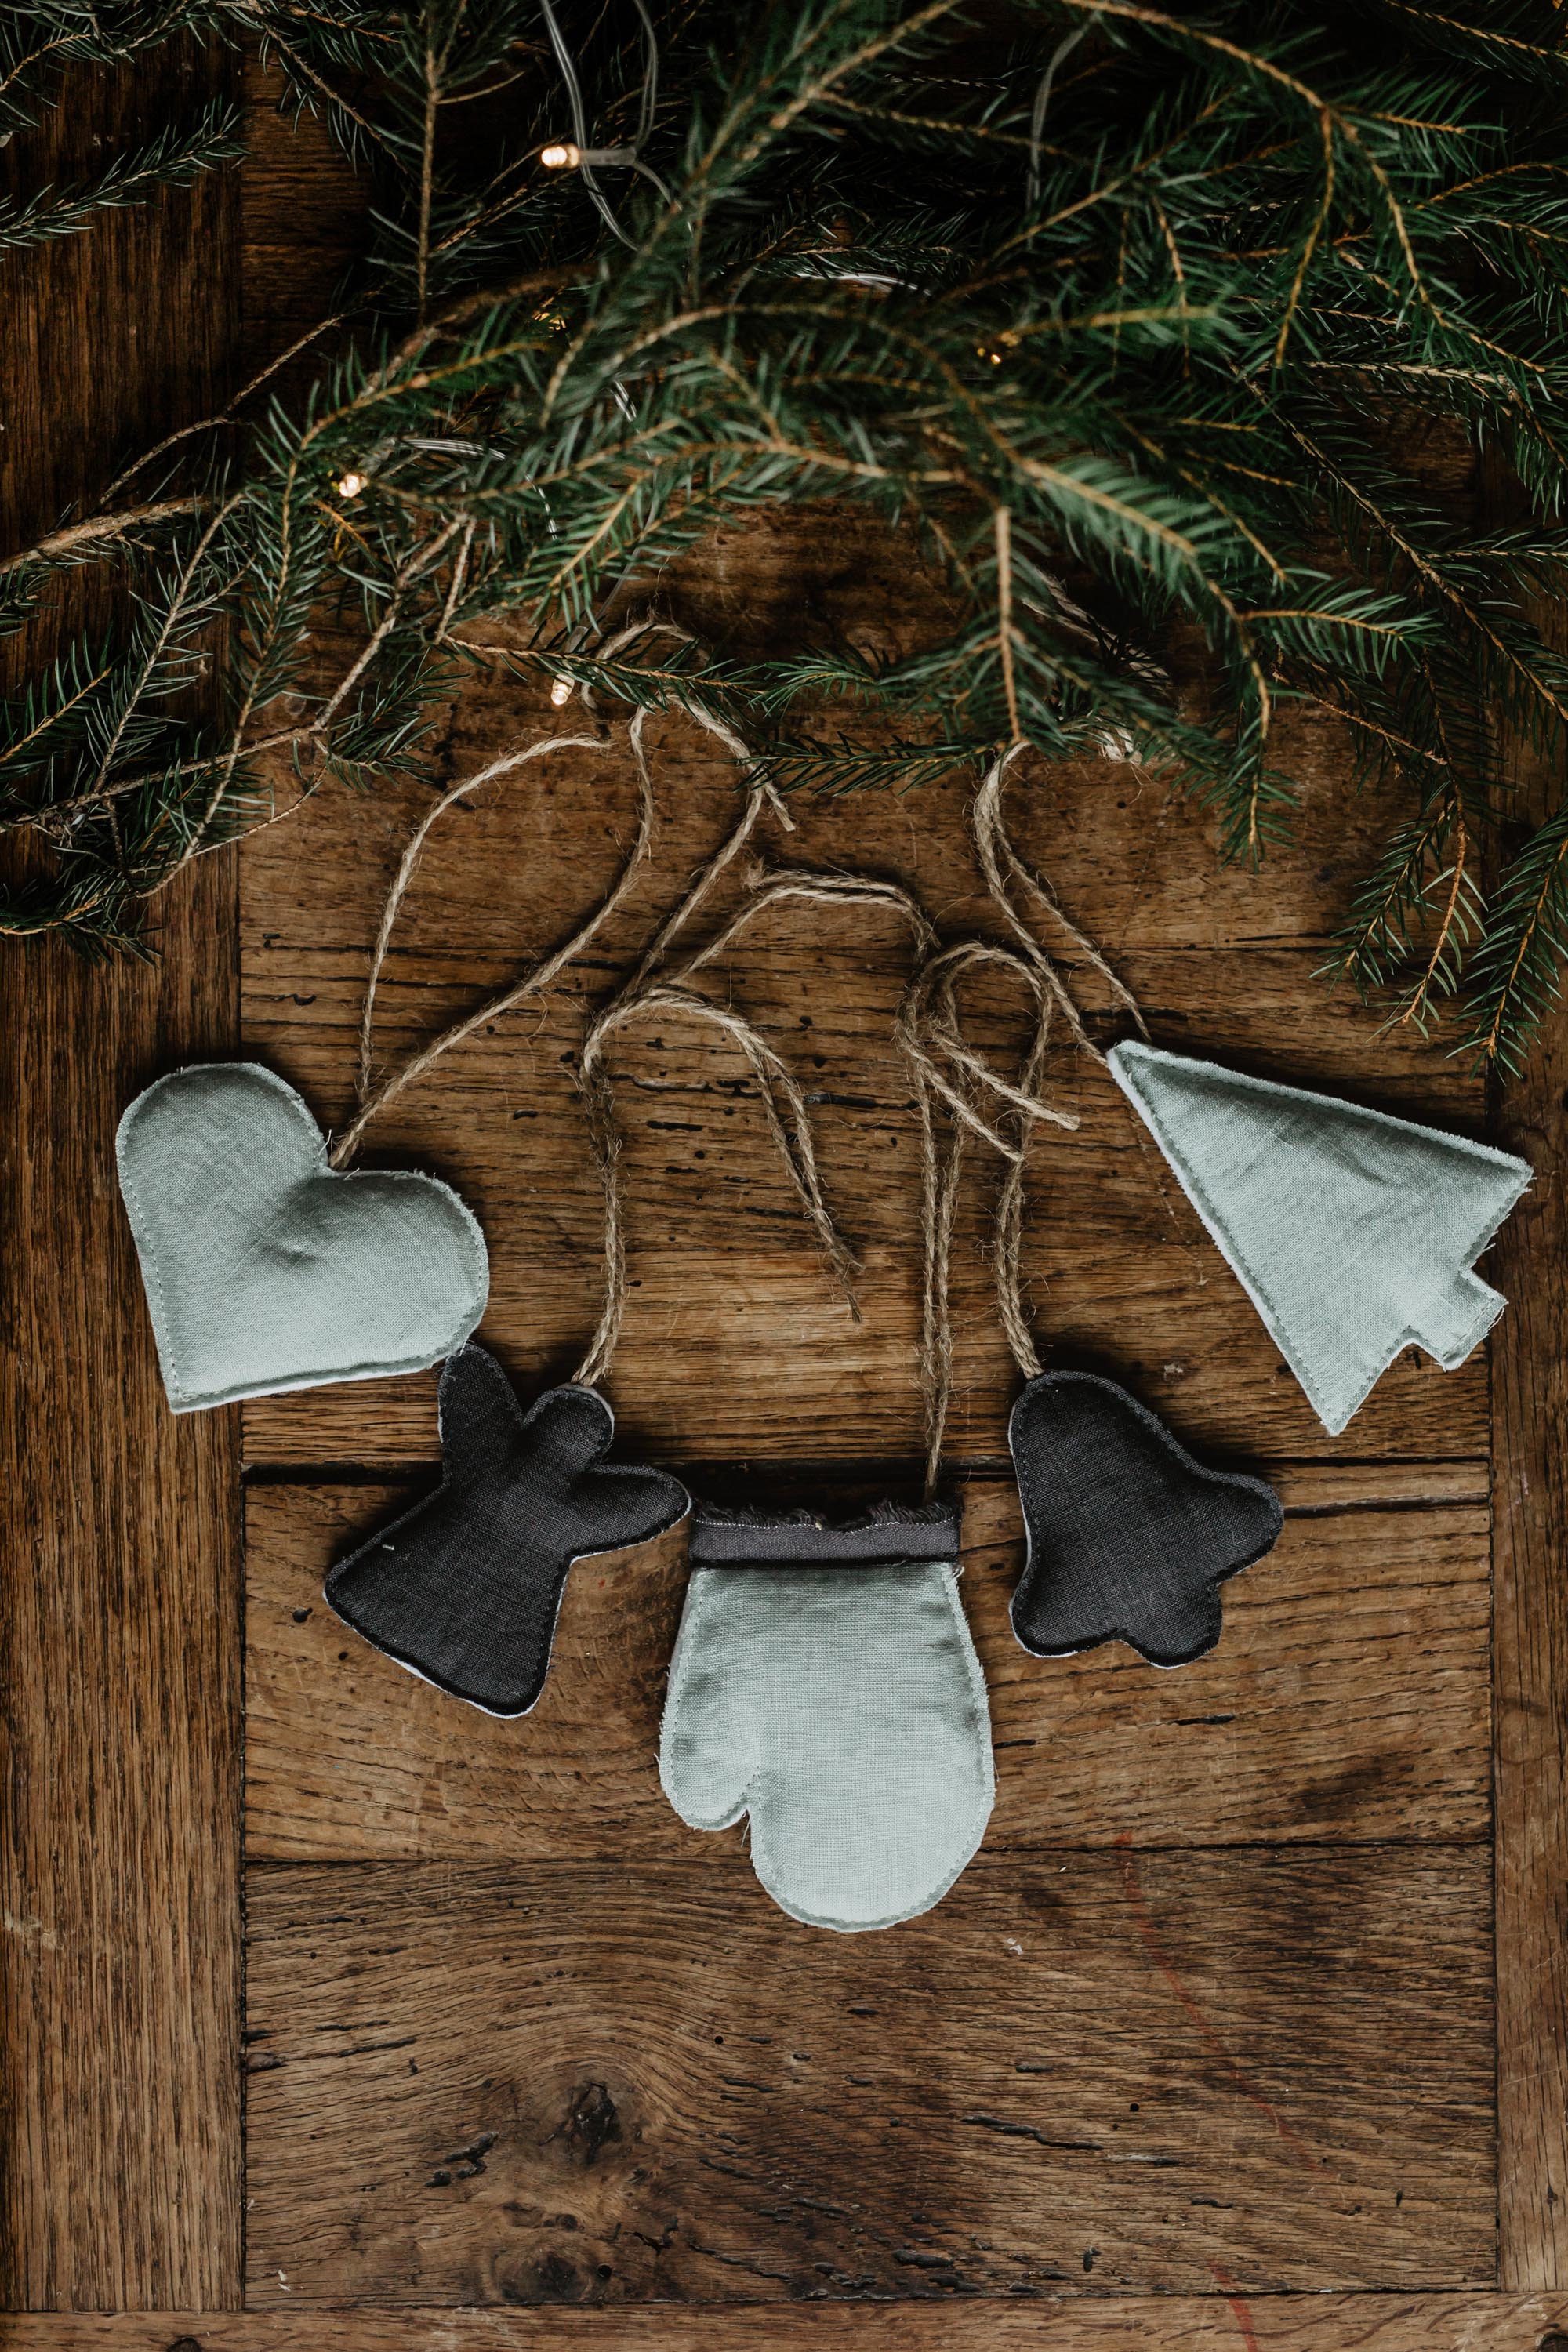 Linen Christmas Tree Decorations Created From Zero-Waste Collection By AmourLInen